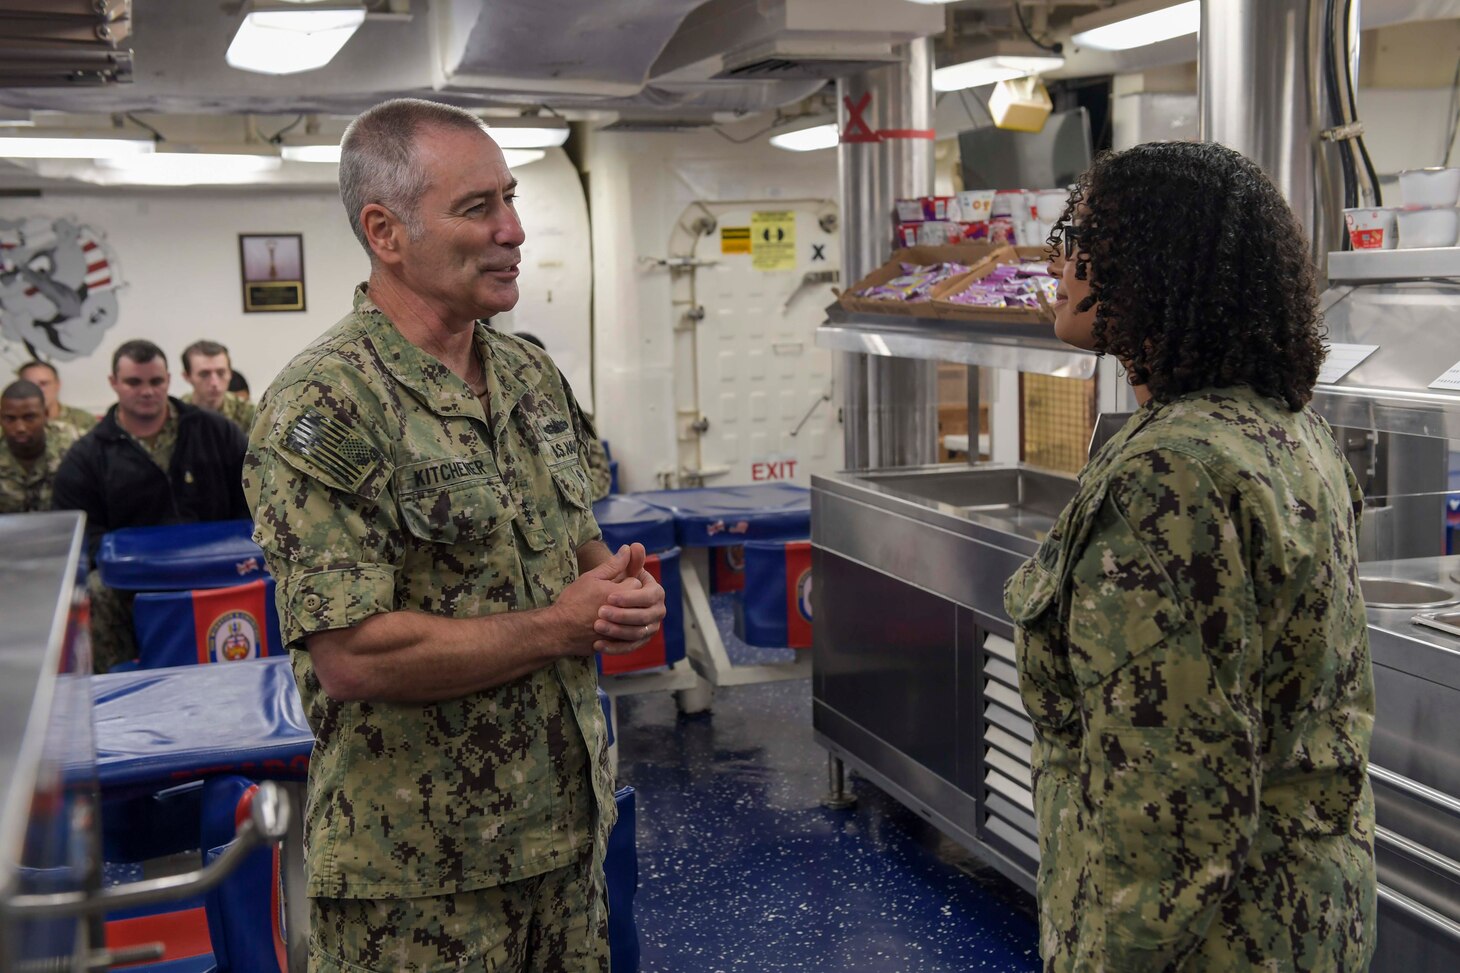 NAVAL STATION NORFOLK (June 23, 2021) Vice Adm. Roy Kitchener, Commander, Naval Surface Force, U.S. Pacific Fleet, speaks with Hospitalman Shakeelah Jordan aboard the Arleigh Burke-class guided missile-destroyer USS Winston S. Churchill (DDG 81) during a ship visit. Kitchener visited Hampton Roads commands and ships June 22-23, and hosted a commander’s call with waterfront leadership. (U.S. Navy photo by Mass Communication Specialist 2nd Class Jacob Milham/Released)